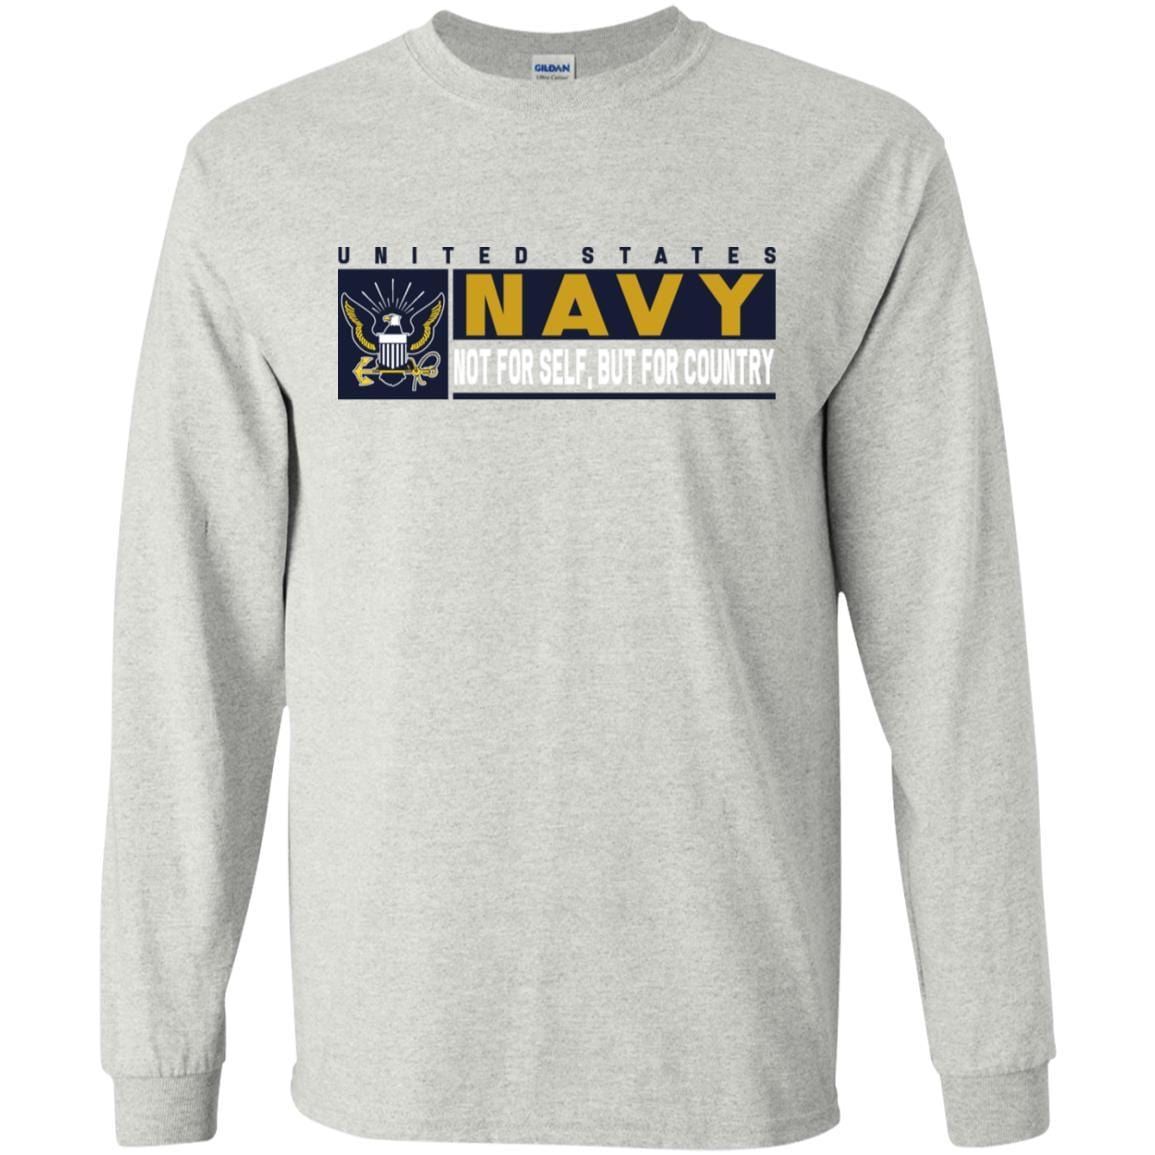 US Navy Not For Self, But For Country Long Sleeve - Pullover Hoodie-TShirt-Navy-Veterans Nation